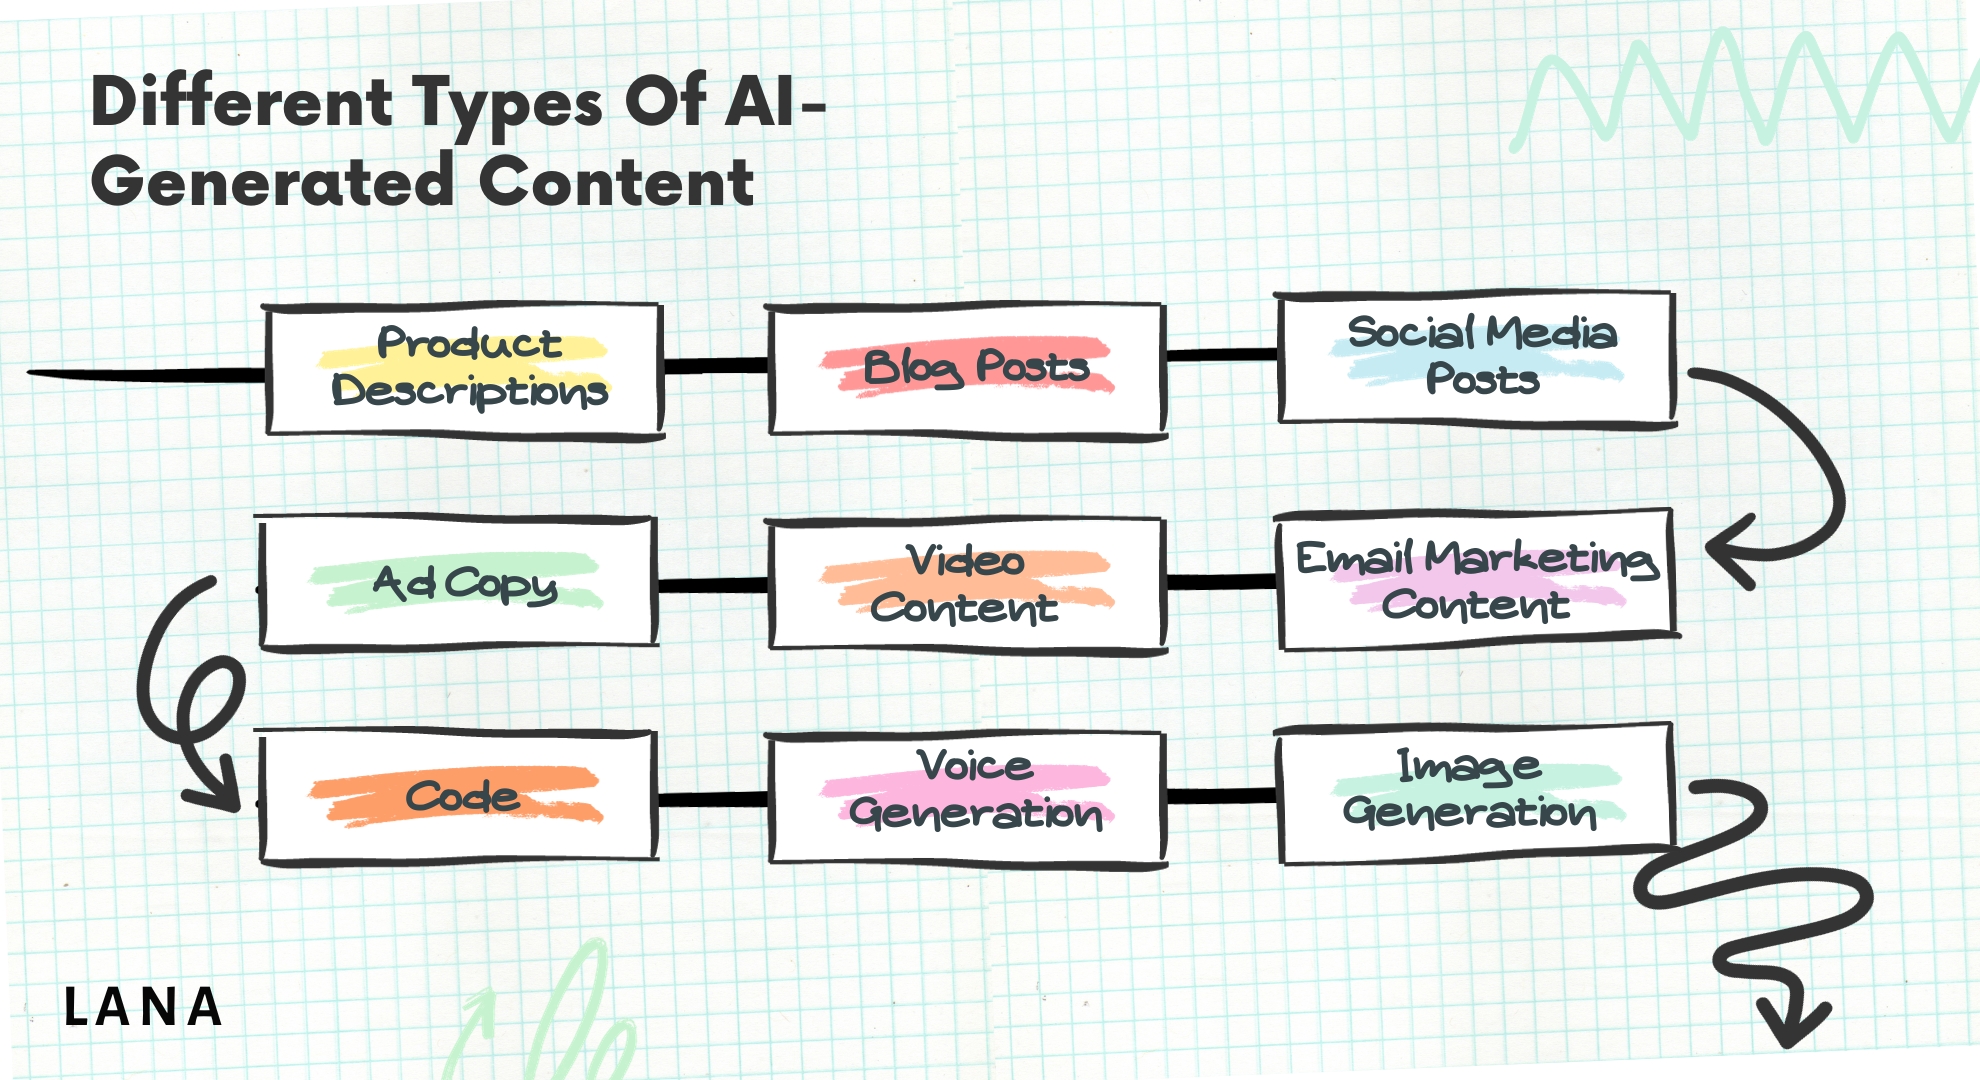 Different Types Of AI-Generated Content